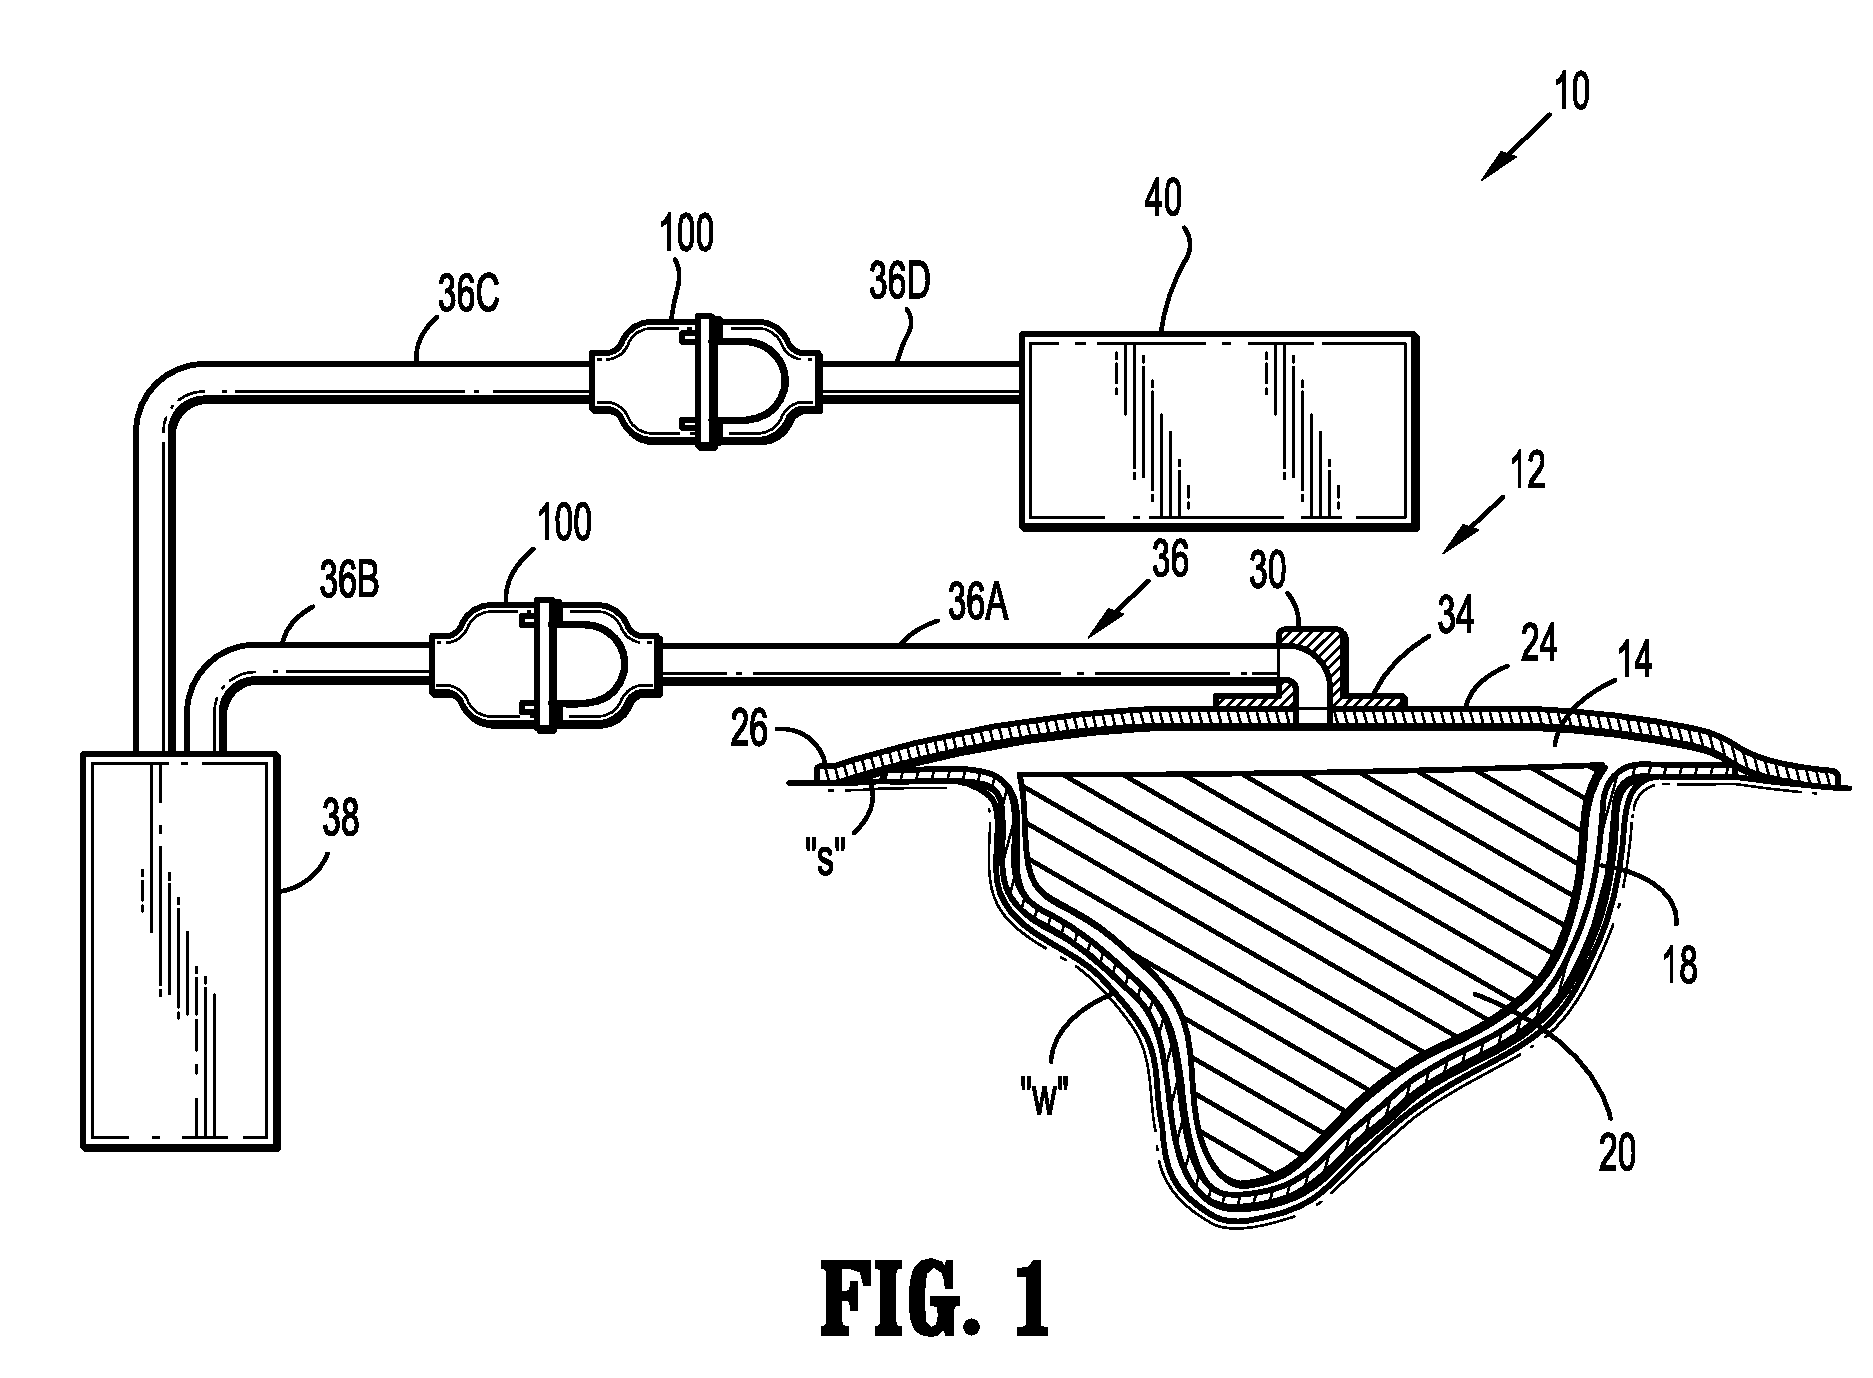 Orientation independent canister for a negative pressure wound therapy device